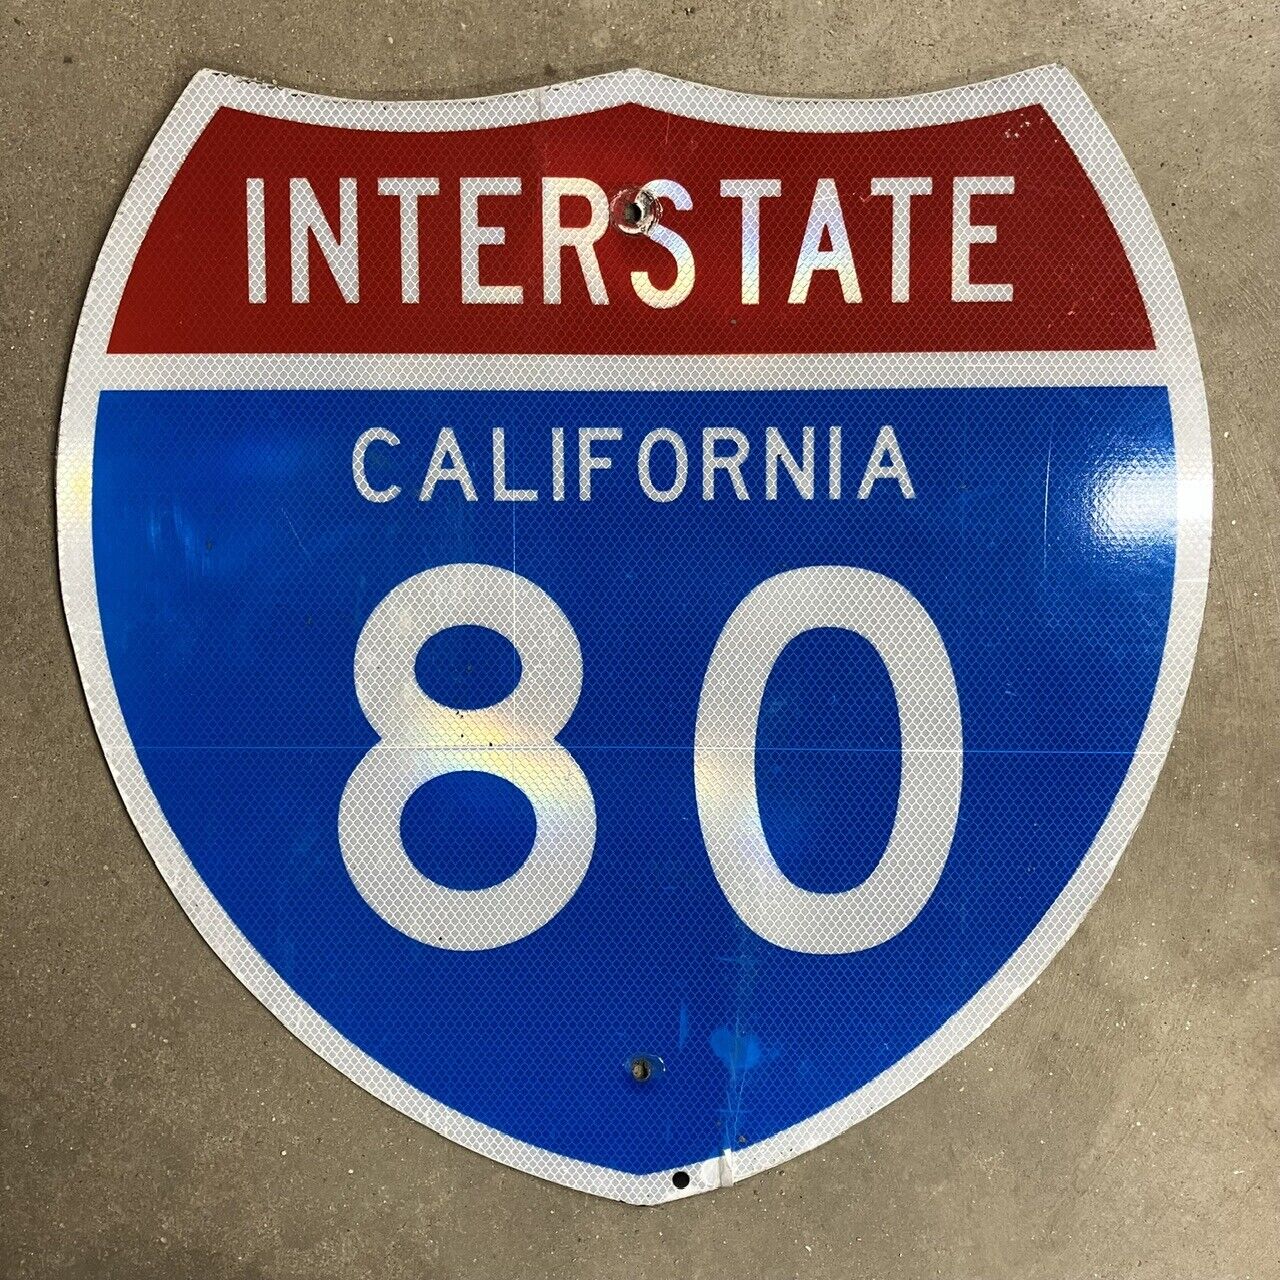 California interstate highway 80 route marker road sign 24x24 2000s S546